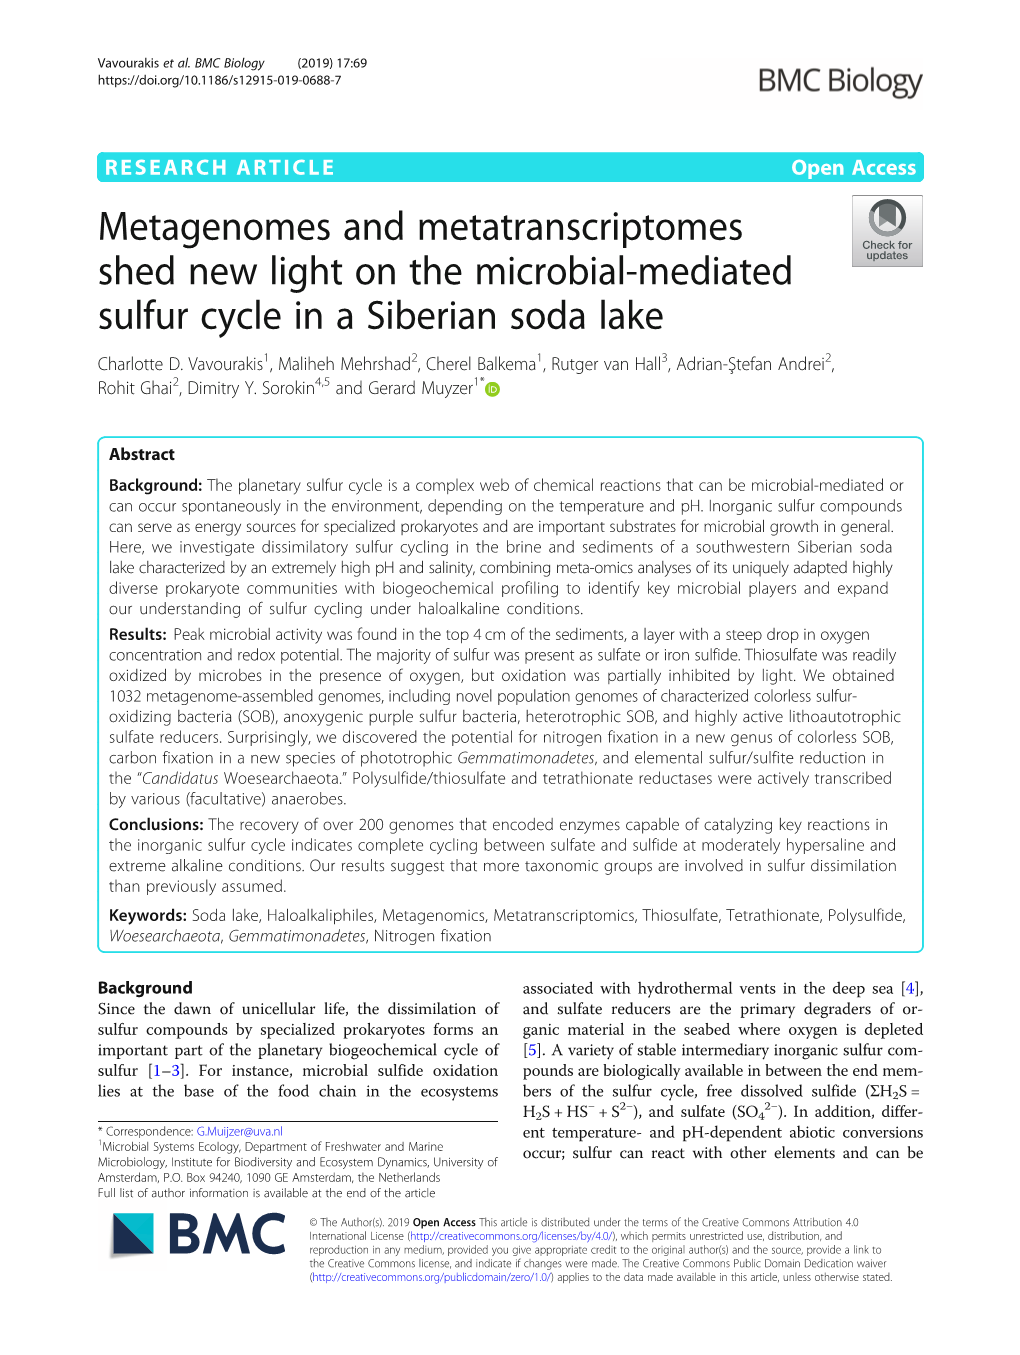 Metagenomes and Metatranscriptomes Shed New Light on the Microbial-Mediated Sulfur Cycle in a Siberian Soda Lake Charlotte D